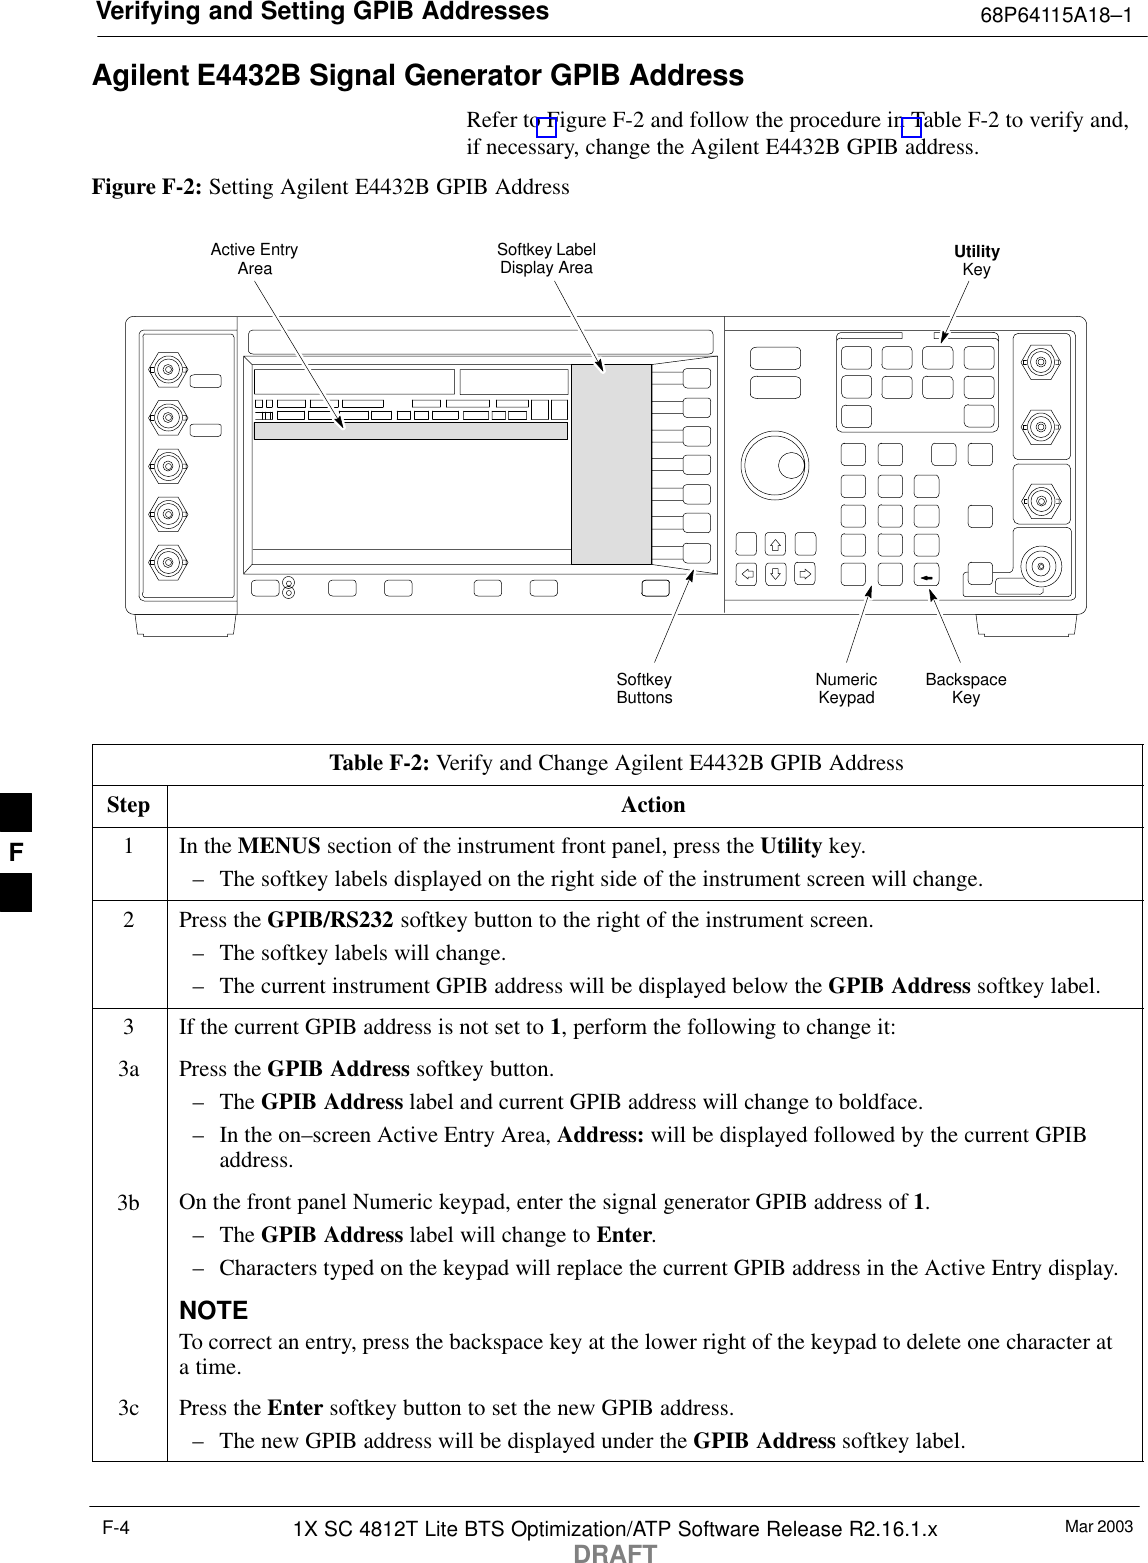 Verifying and Setting GPIB Addresses 68P64115A18–1Mar 20031X SC 4812T Lite BTS Optimization/ATP Software Release R2.16.1.xDRAFTF-4Agilent E4432B Signal Generator GPIB AddressRefer to Figure F-2 and follow the procedure in Table F-2 to verify and,if necessary, change the Agilent E4432B GPIB address.Figure F-2: Setting Agilent E4432B GPIB AddressNumericKeypadSoftkeyButtonsSoftkey LabelDisplay AreaActive EntryAreaBackspaceKeyUtilityKeyTable F-2: Verify and Change Agilent E4432B GPIB AddressStep Action1In the MENUS section of the instrument front panel, press the Utility key.– The softkey labels displayed on the right side of the instrument screen will change.2Press the GPIB/RS232 softkey button to the right of the instrument screen.– The softkey labels will change.– The current instrument GPIB address will be displayed below the GPIB Address softkey label.3If the current GPIB address is not set to 1, perform the following to change it:3a Press the GPIB Address softkey button.– The GPIB Address label and current GPIB address will change to boldface.– In the on–screen Active Entry Area, Address: will be displayed followed by the current GPIBaddress.3b On the front panel Numeric keypad, enter the signal generator GPIB address of 1.– The GPIB Address label will change to Enter.– Characters typed on the keypad will replace the current GPIB address in the Active Entry display.NOTETo correct an entry, press the backspace key at the lower right of the keypad to delete one character ata time.3c Press the Enter softkey button to set the new GPIB address.– The new GPIB address will be displayed under the GPIB Address softkey label. F